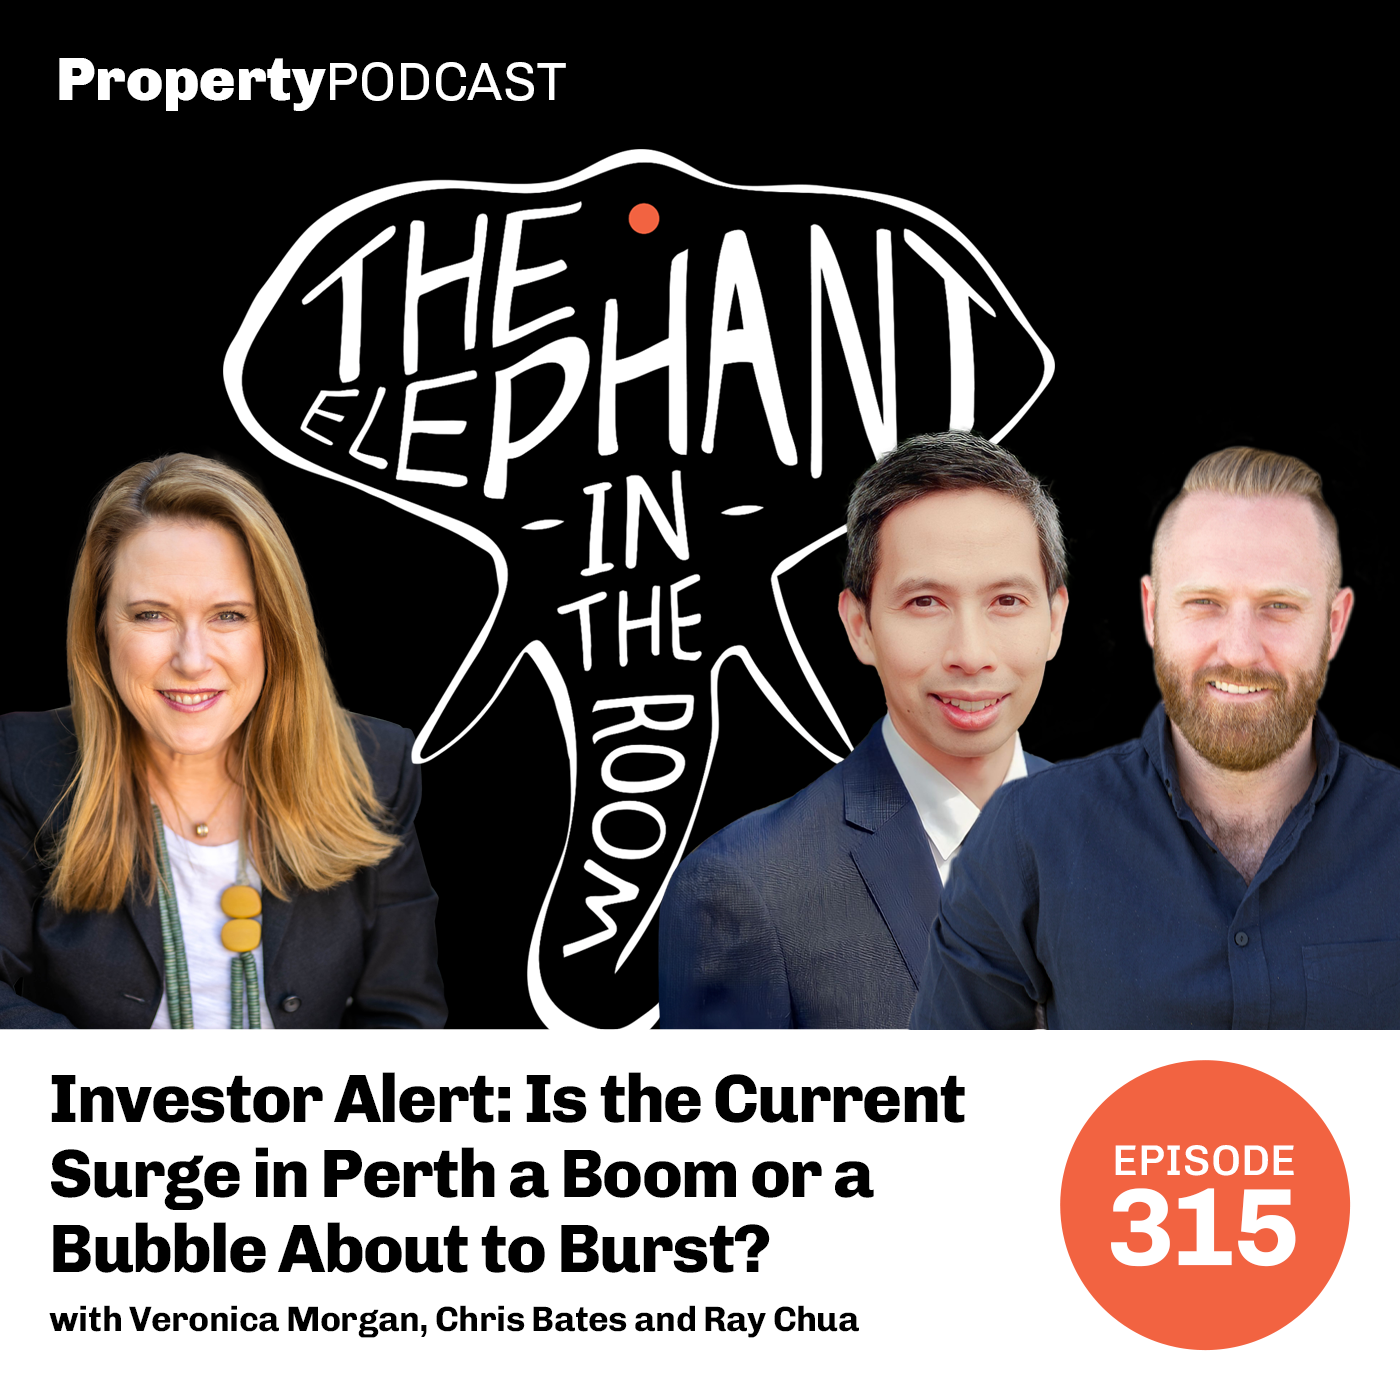 Investor Alert: Is the Current Surge in Perth a Boom or a Bubble About to Burst?